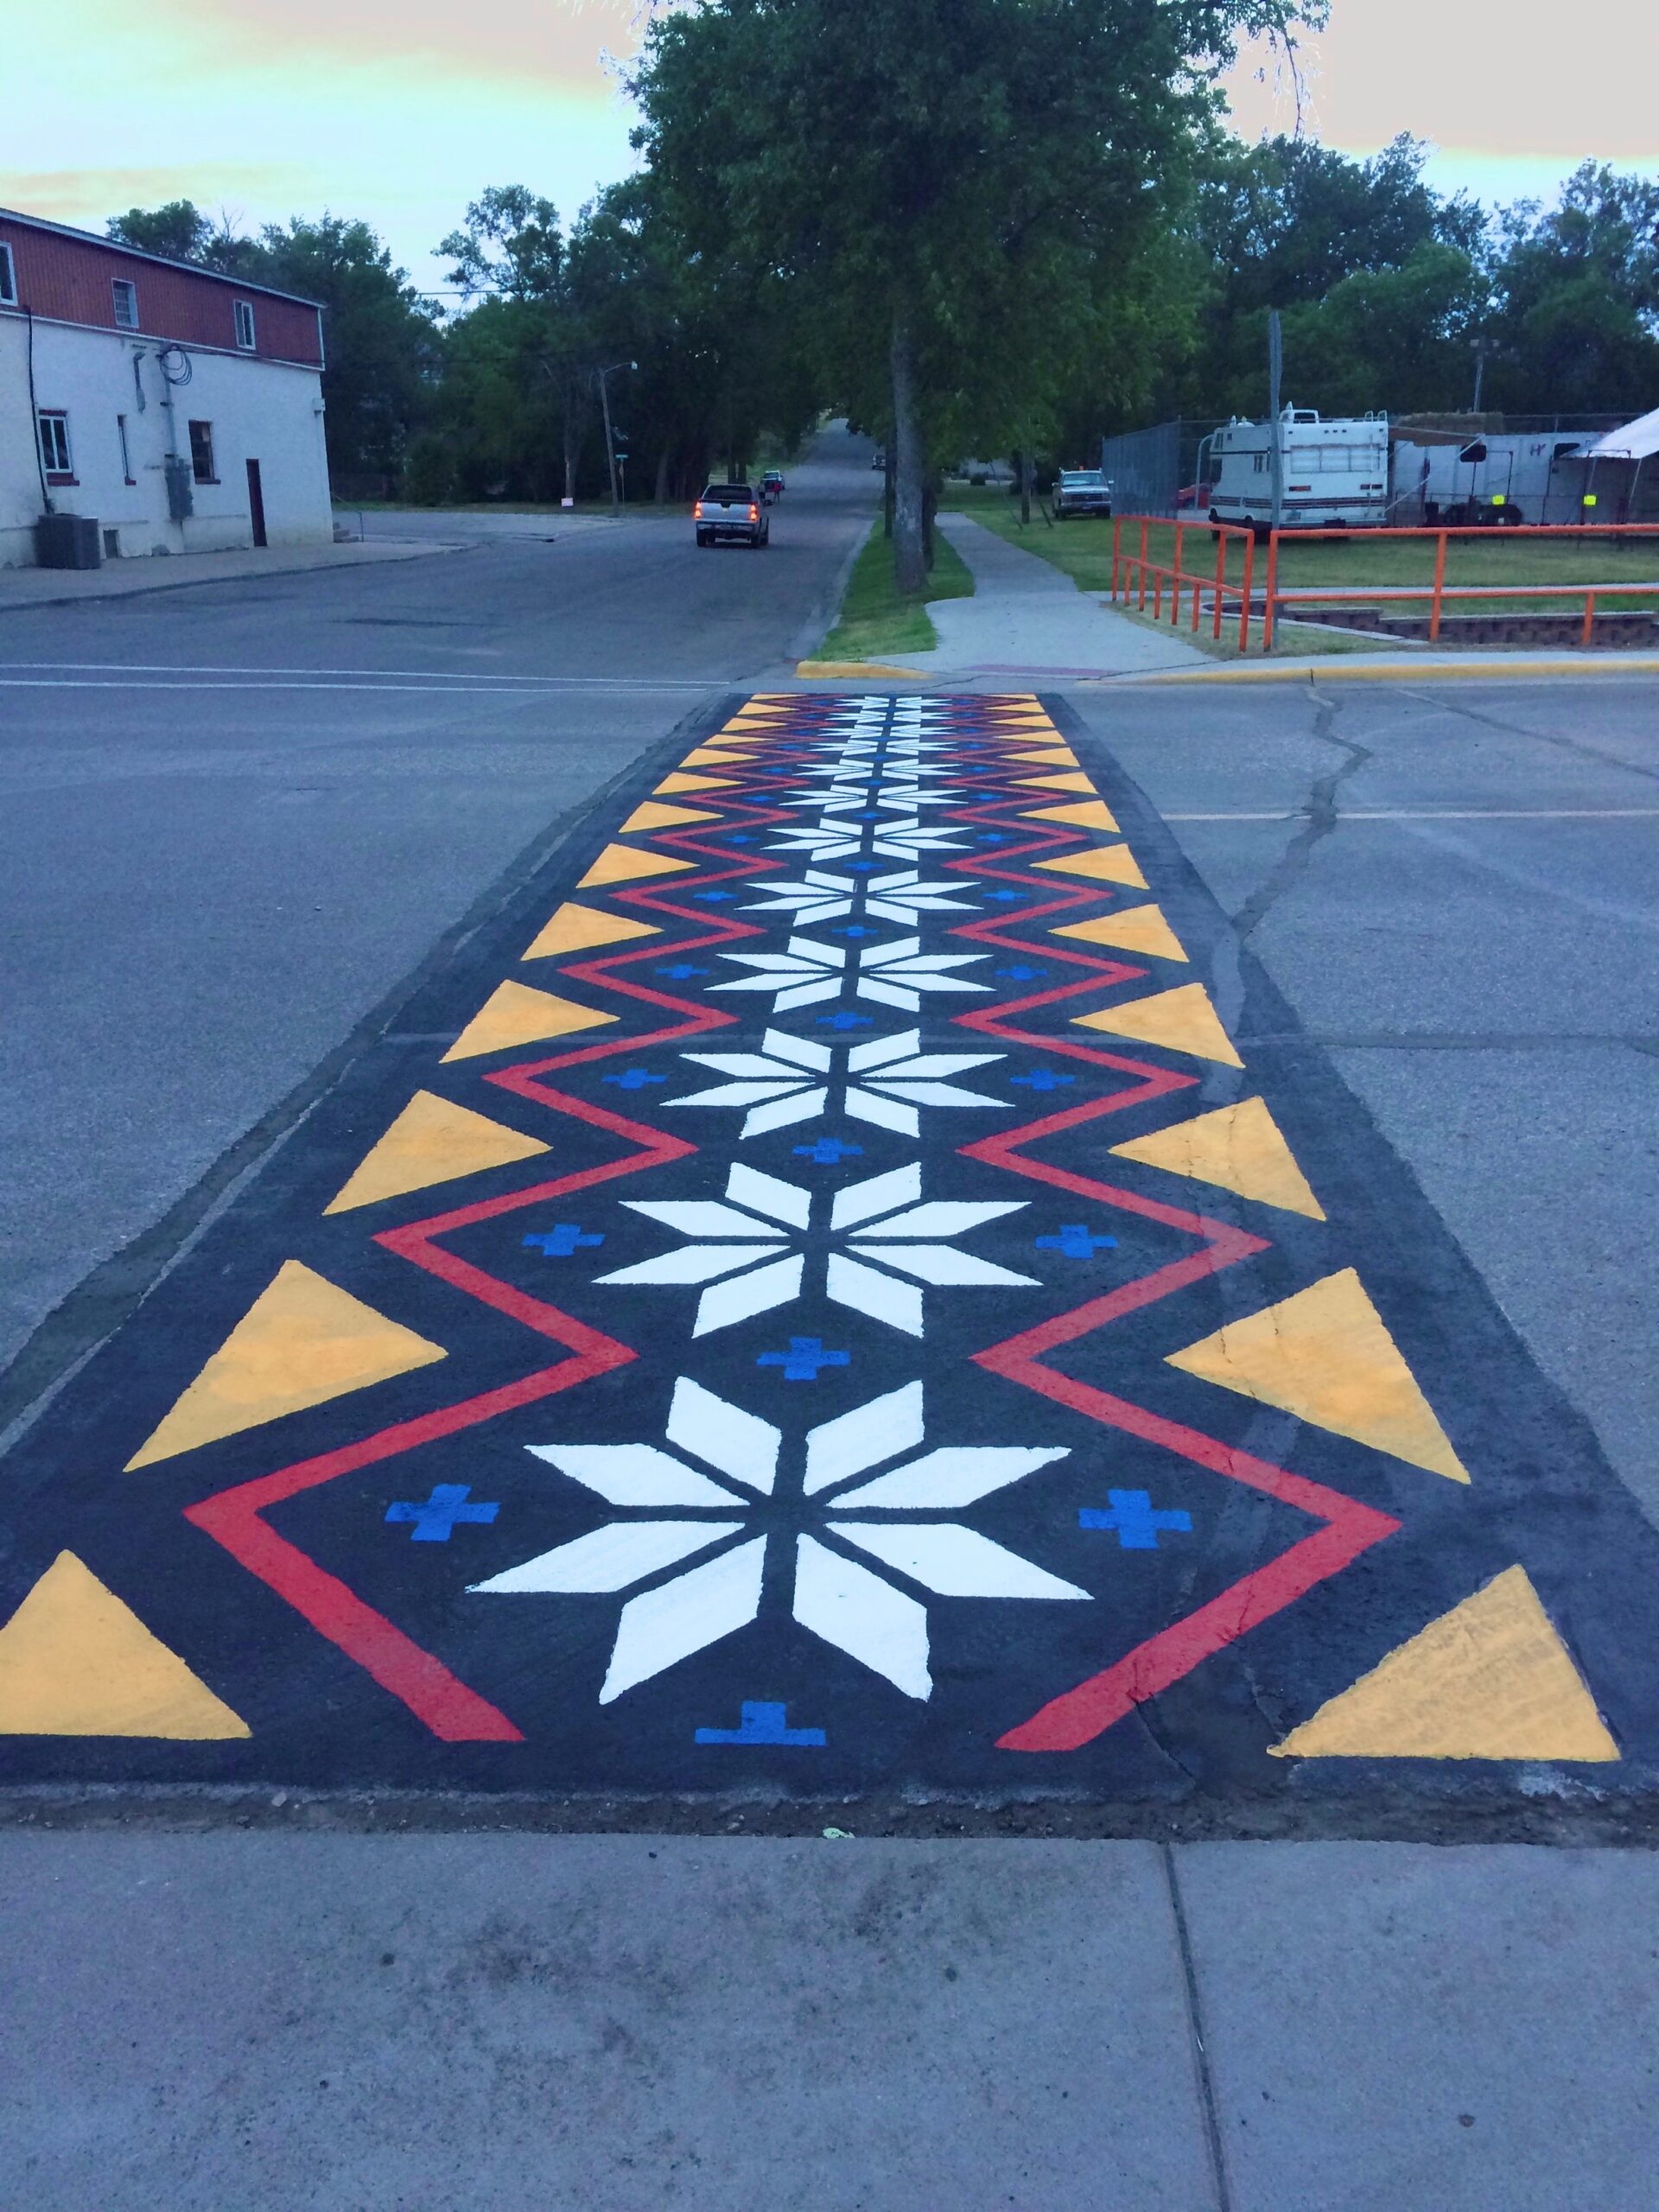 Crosswalk mural featuring a repeating 8 point star design.